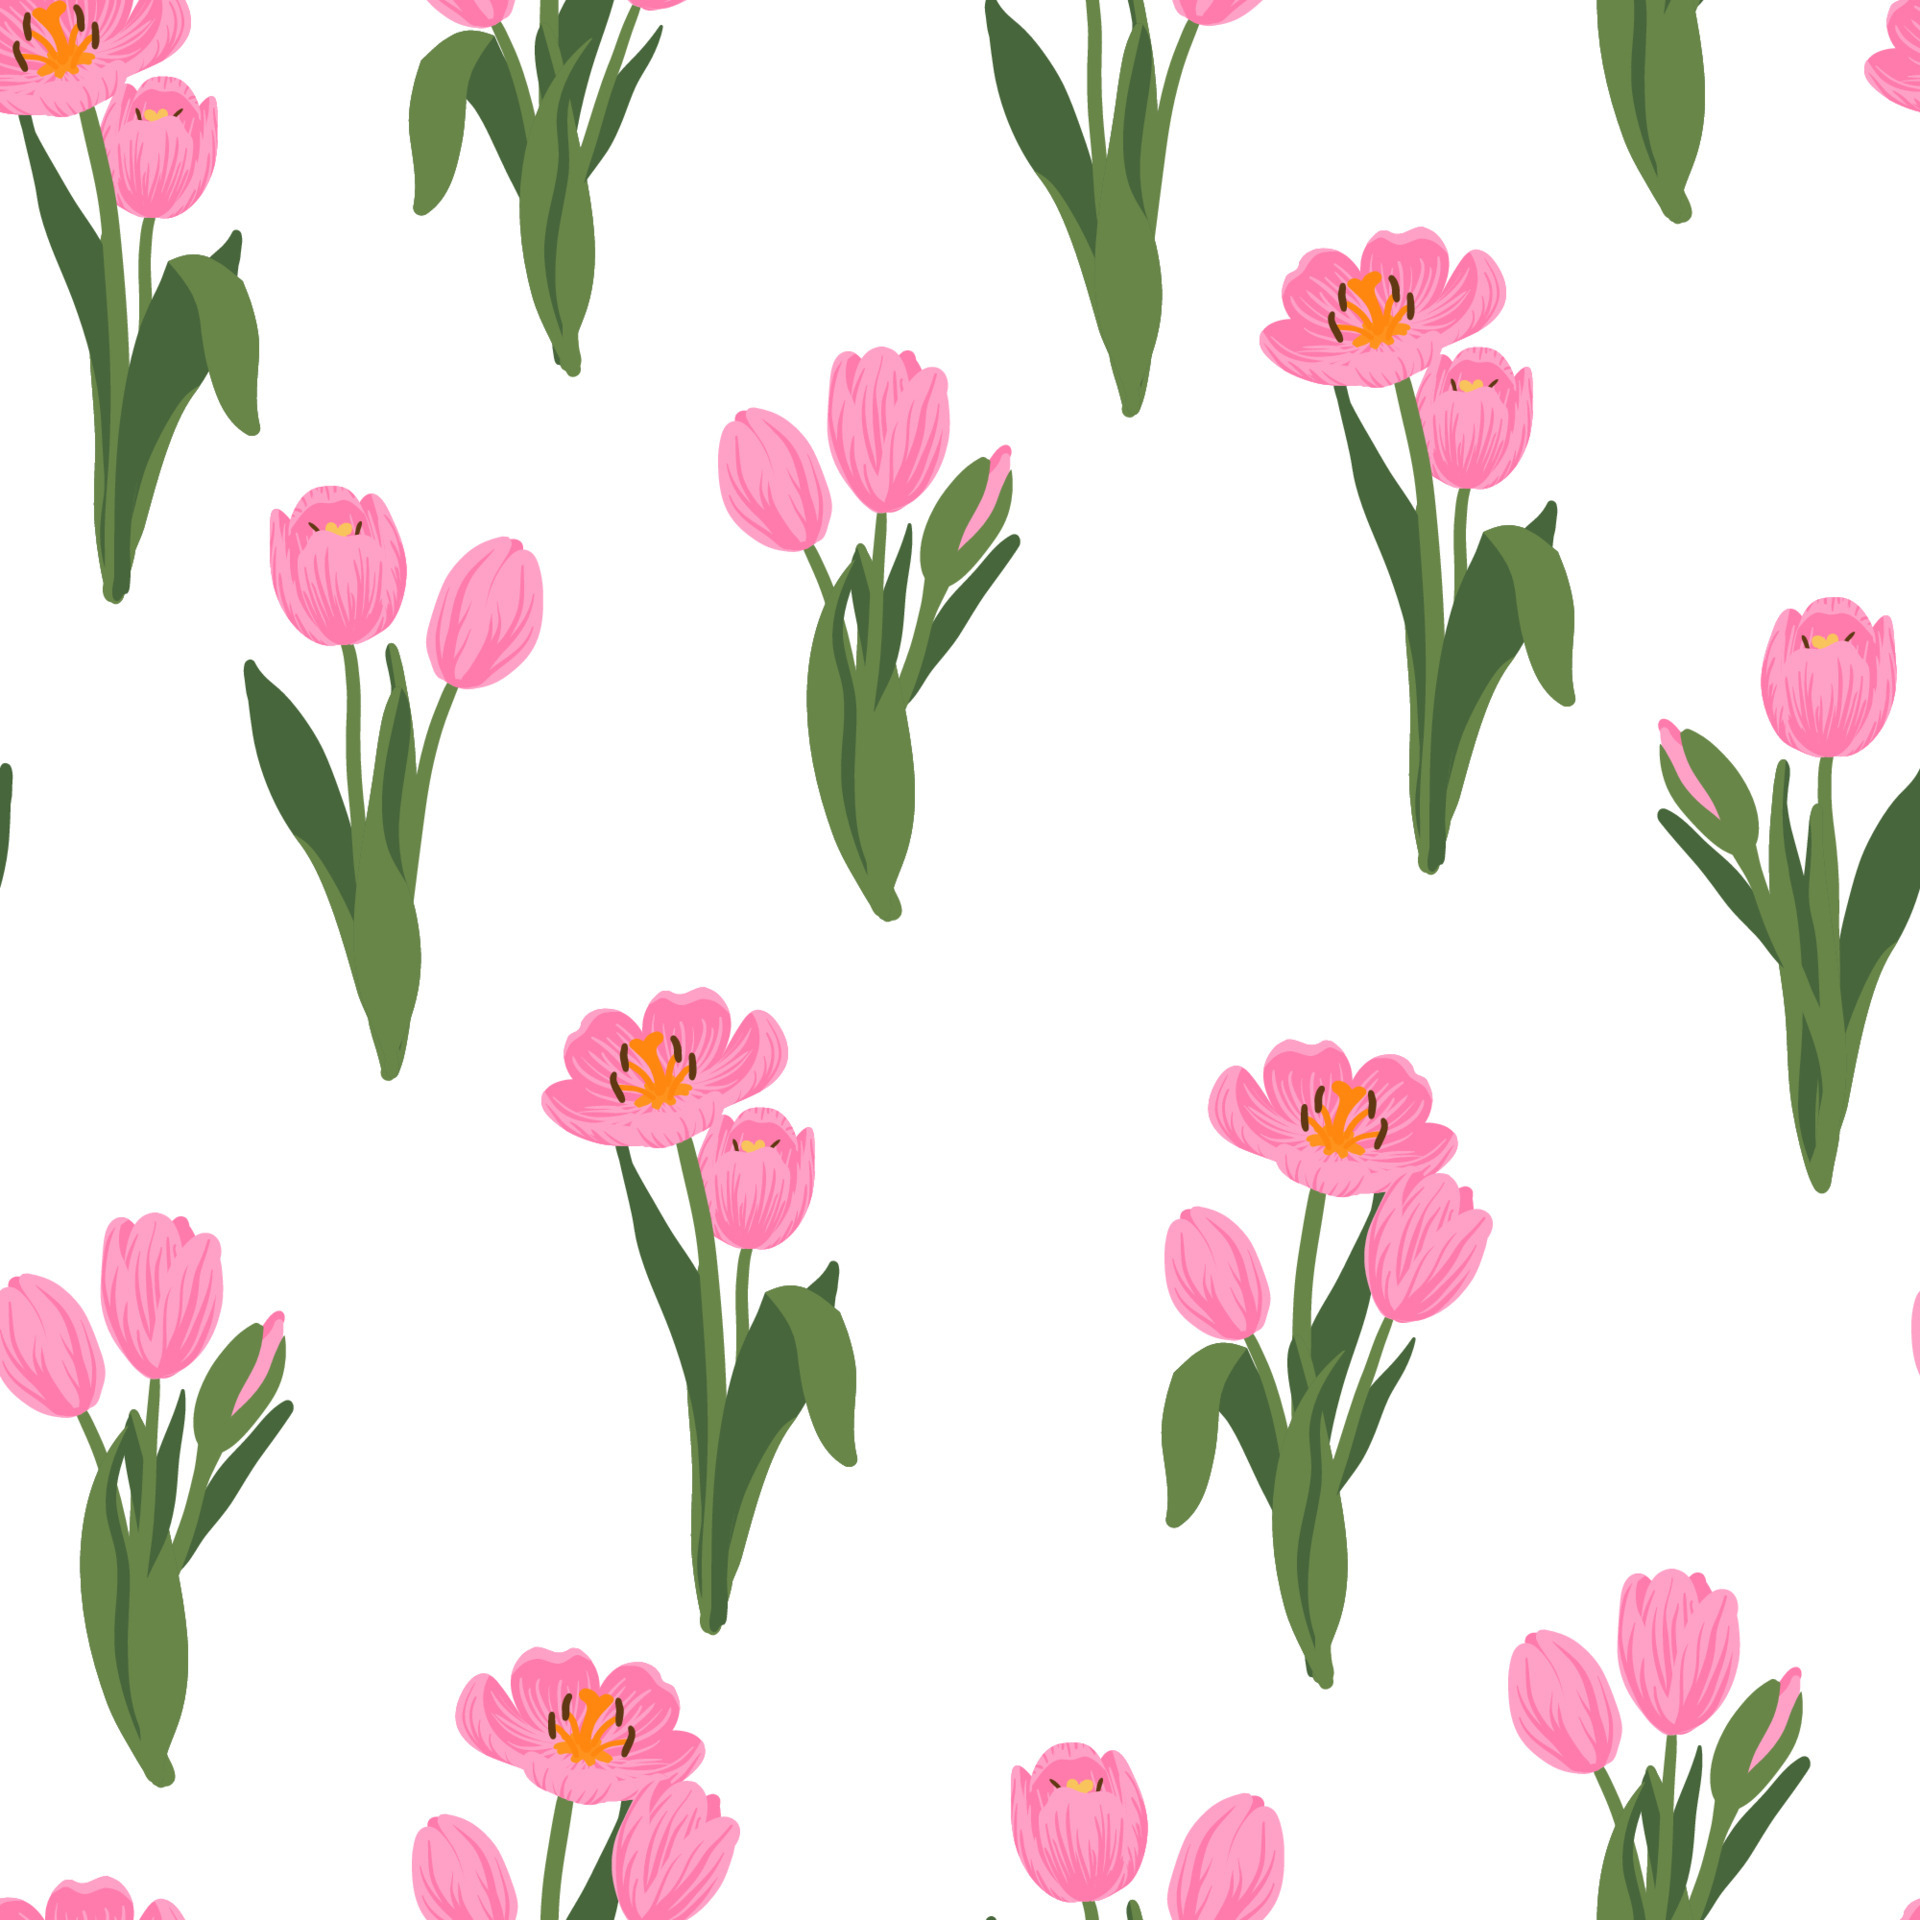 1920x1920 Seamless floral pattern red, yellow, purple, pink tulips and green leaves. Spring flowers background for wrapping, textile, wallpaper, scrapbook, Easter, Happy Mothers, Womens Day. Flat cartoon design 4806455 Vector Art